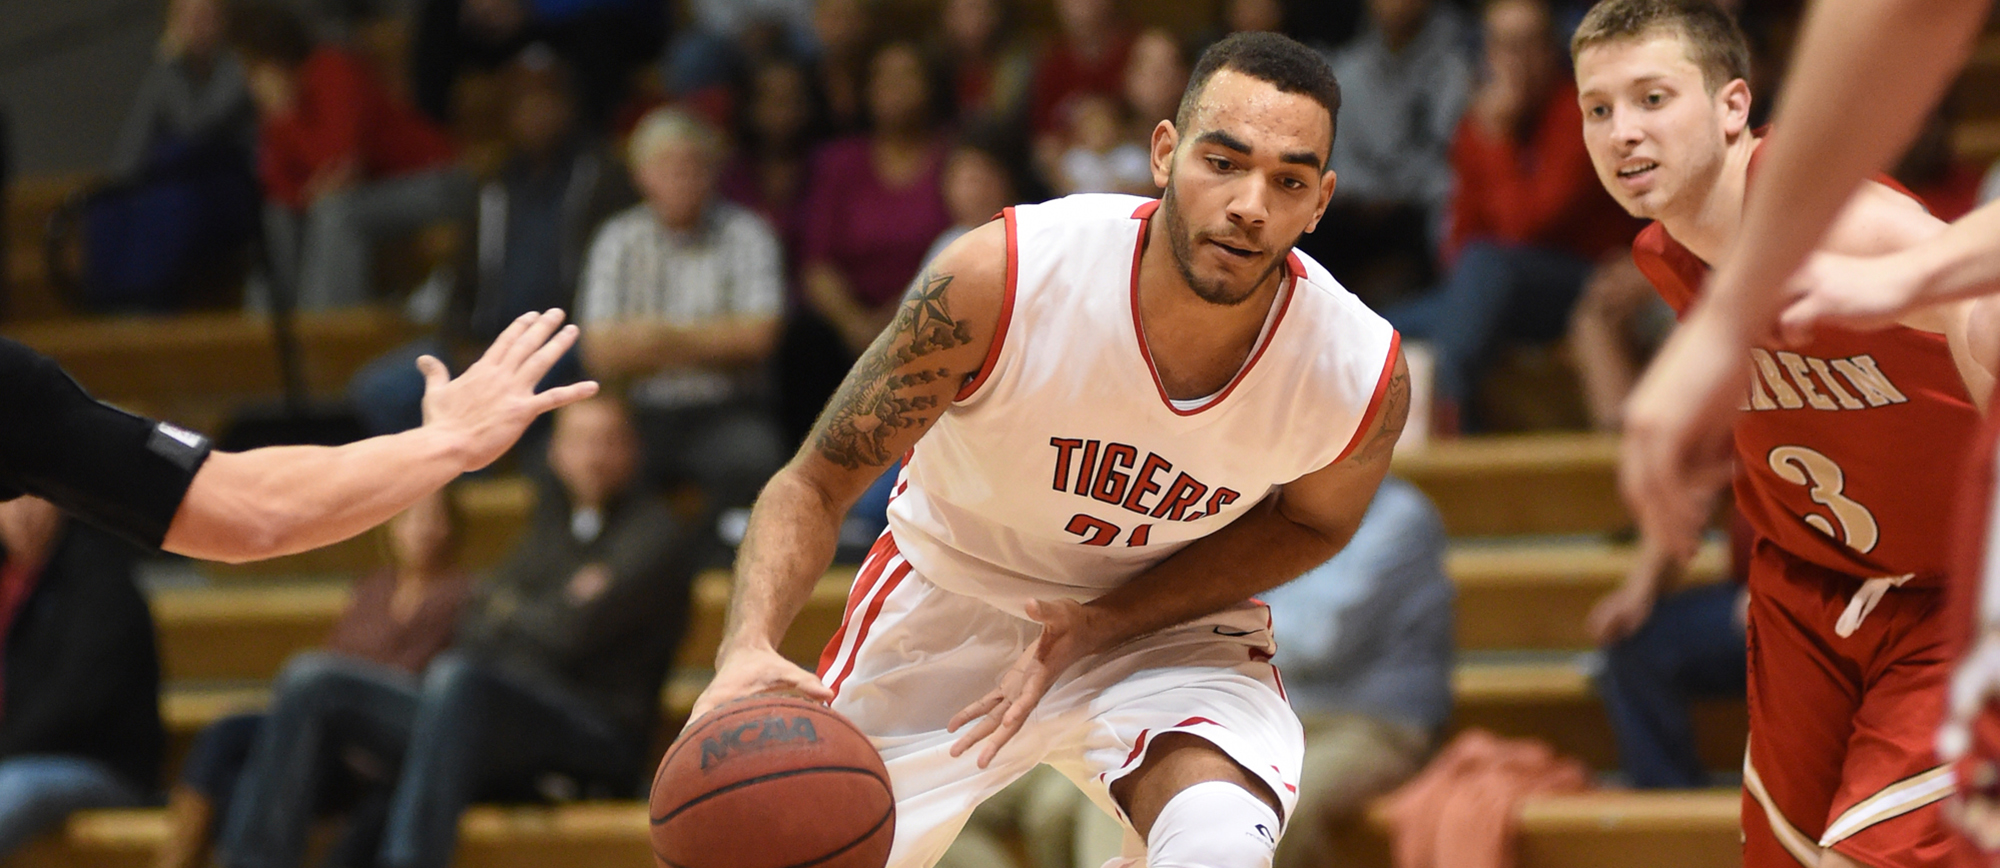 Junior Jaelin Williams and his 18 points lead the Tigers offense Tuesday night. File Photo|Nick Falzerano